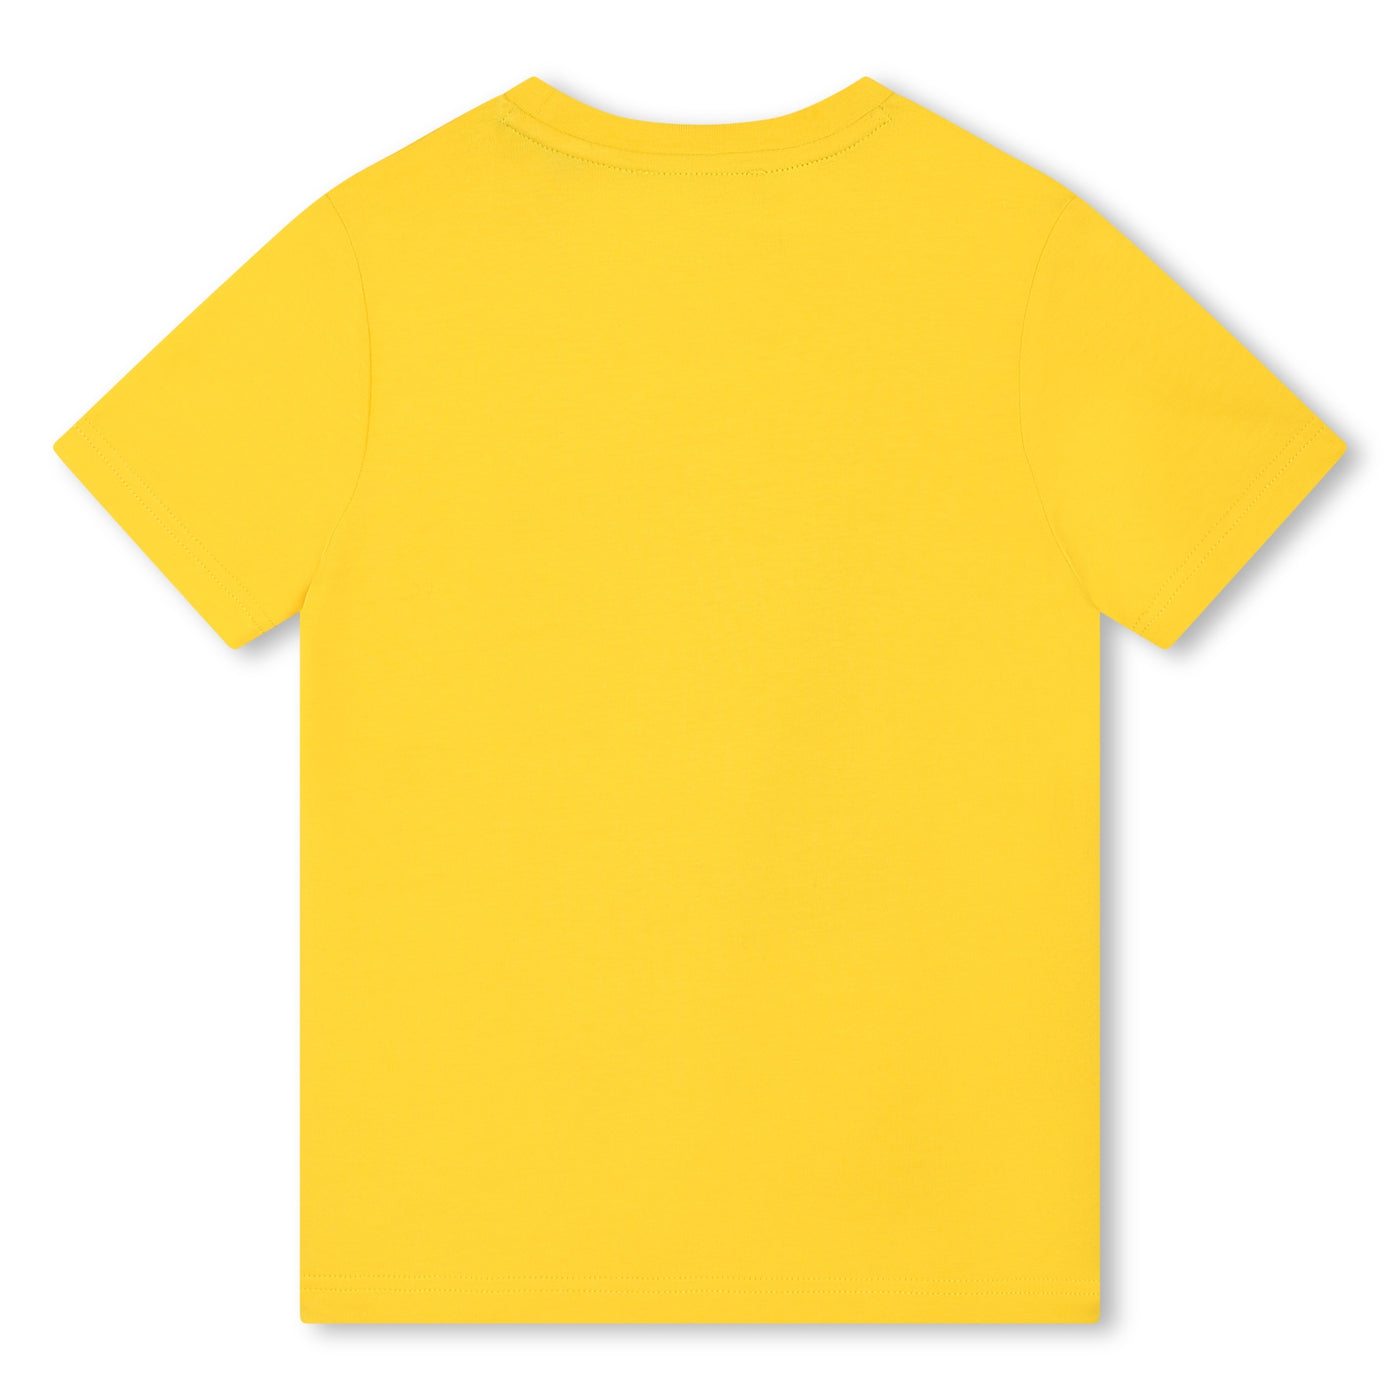 Yellow T-shirt by DKNY